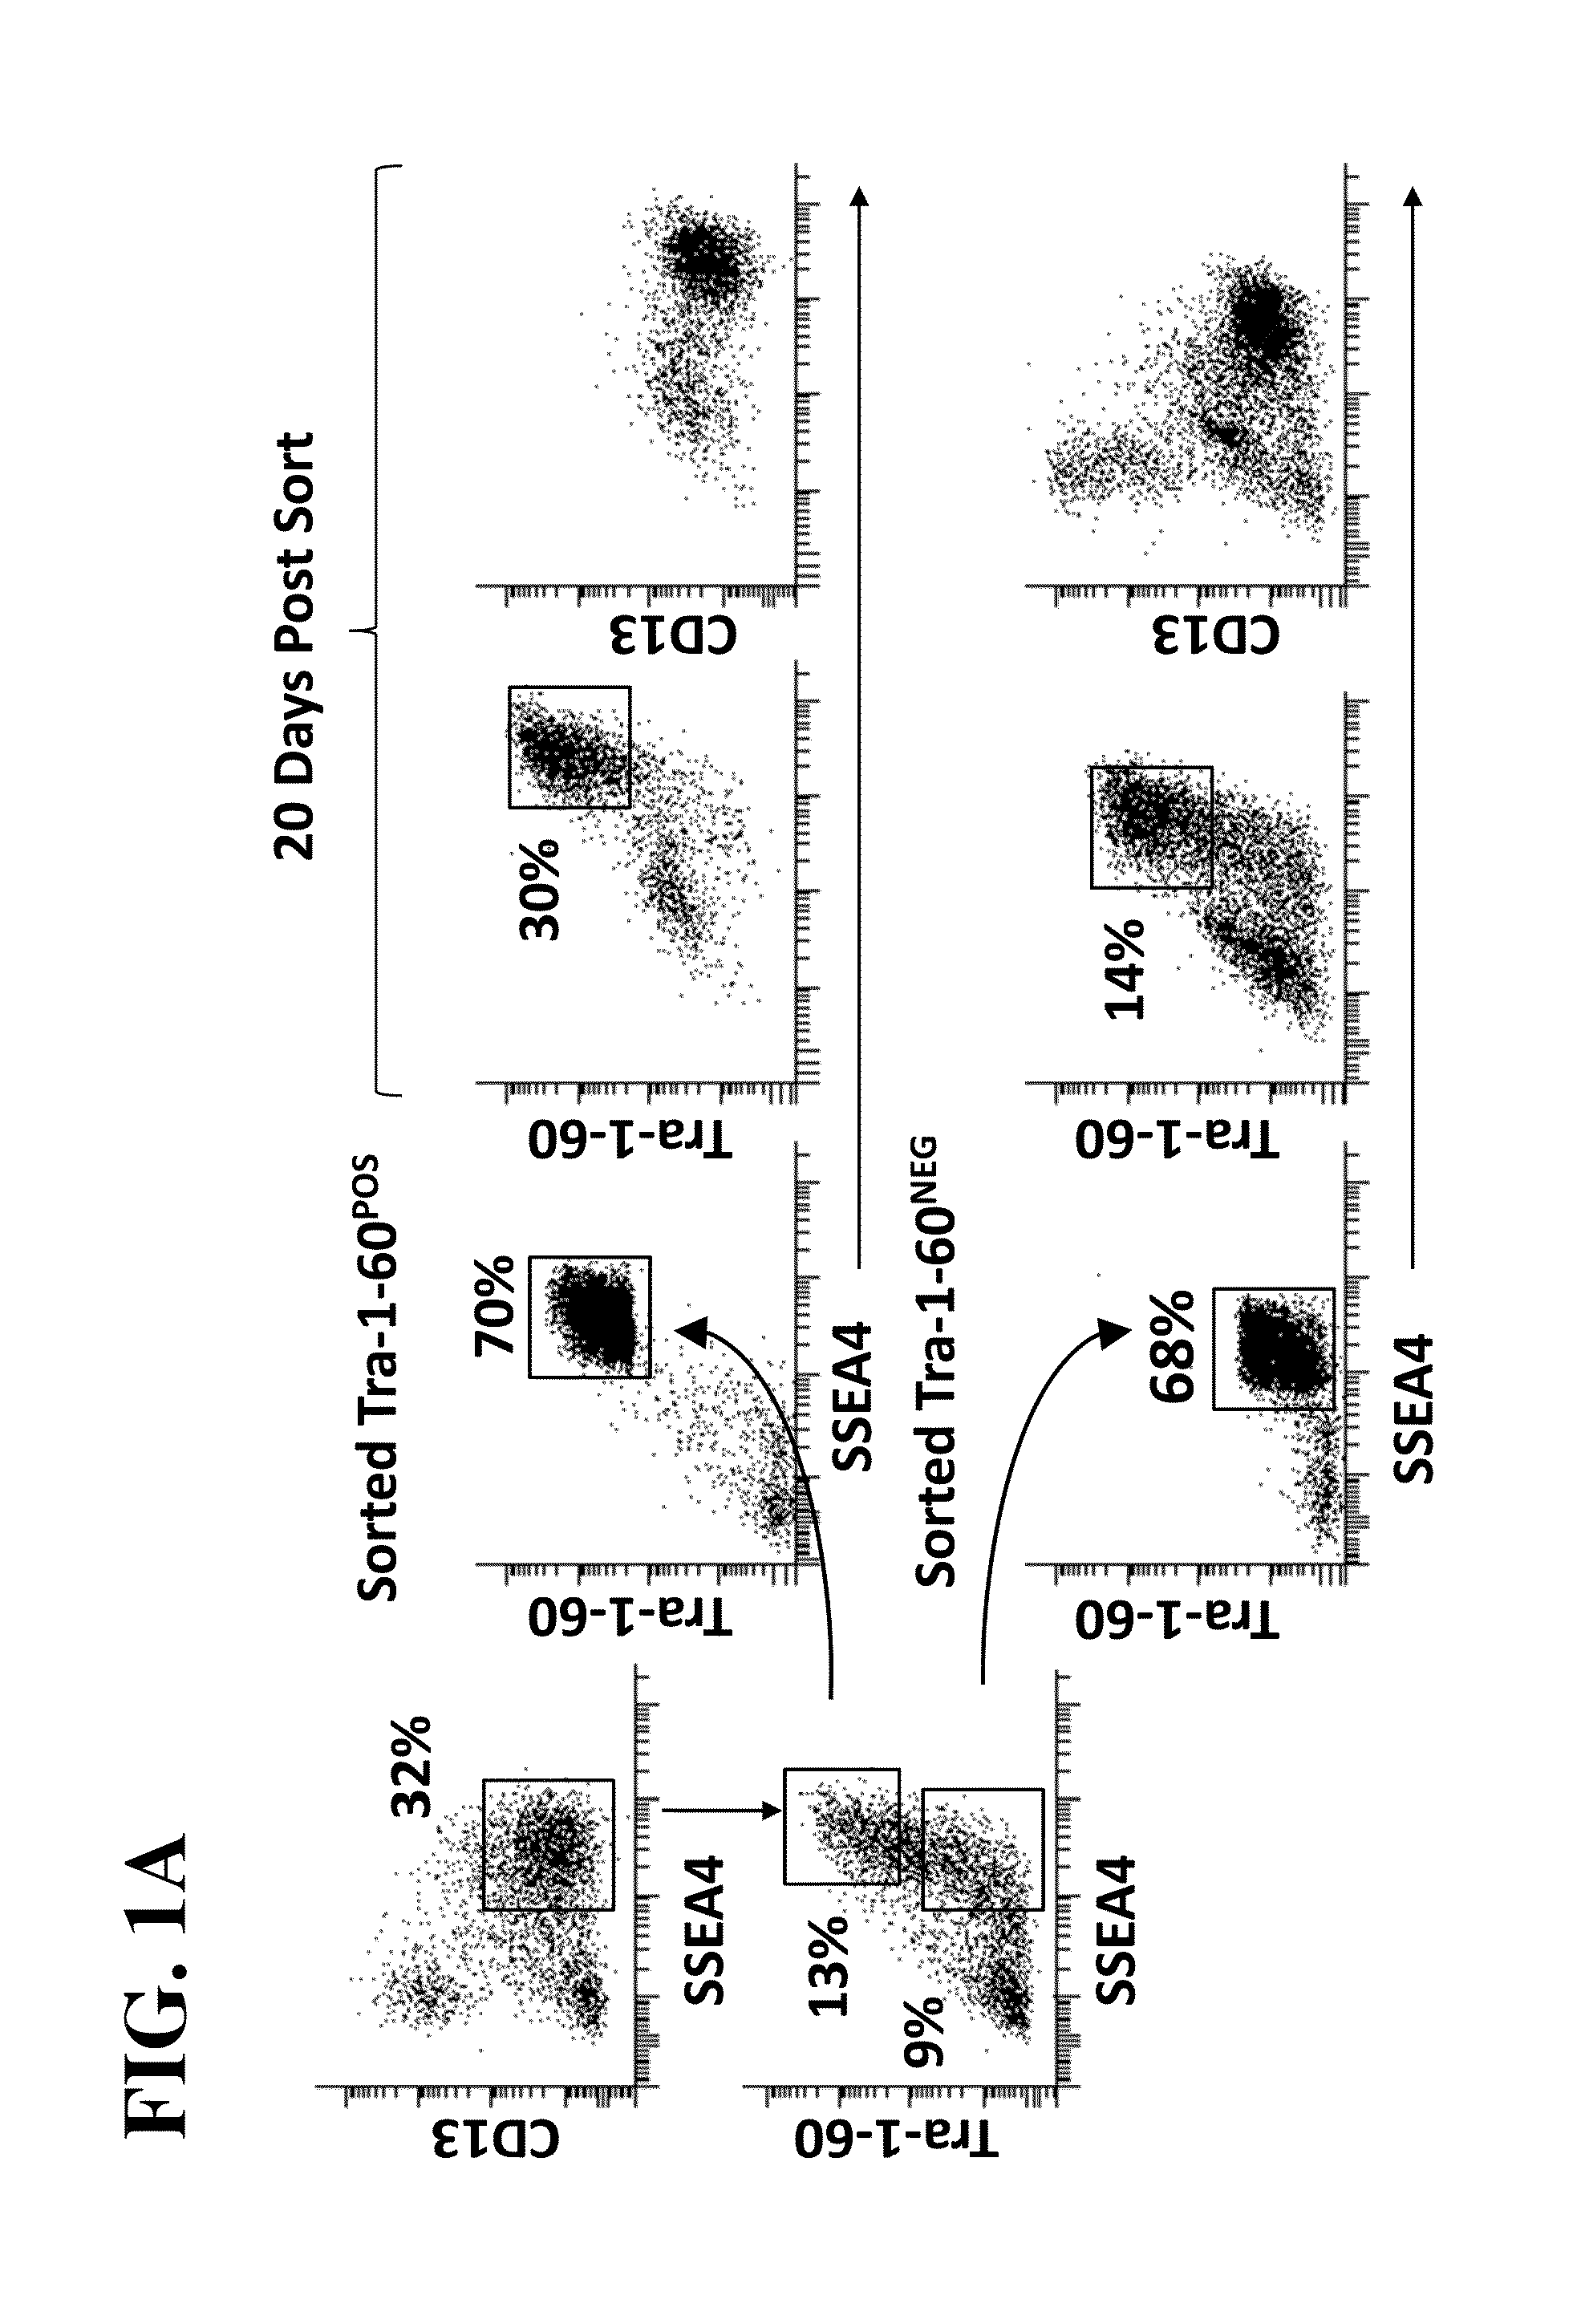 Methods for producing induced pluripotent stem cells